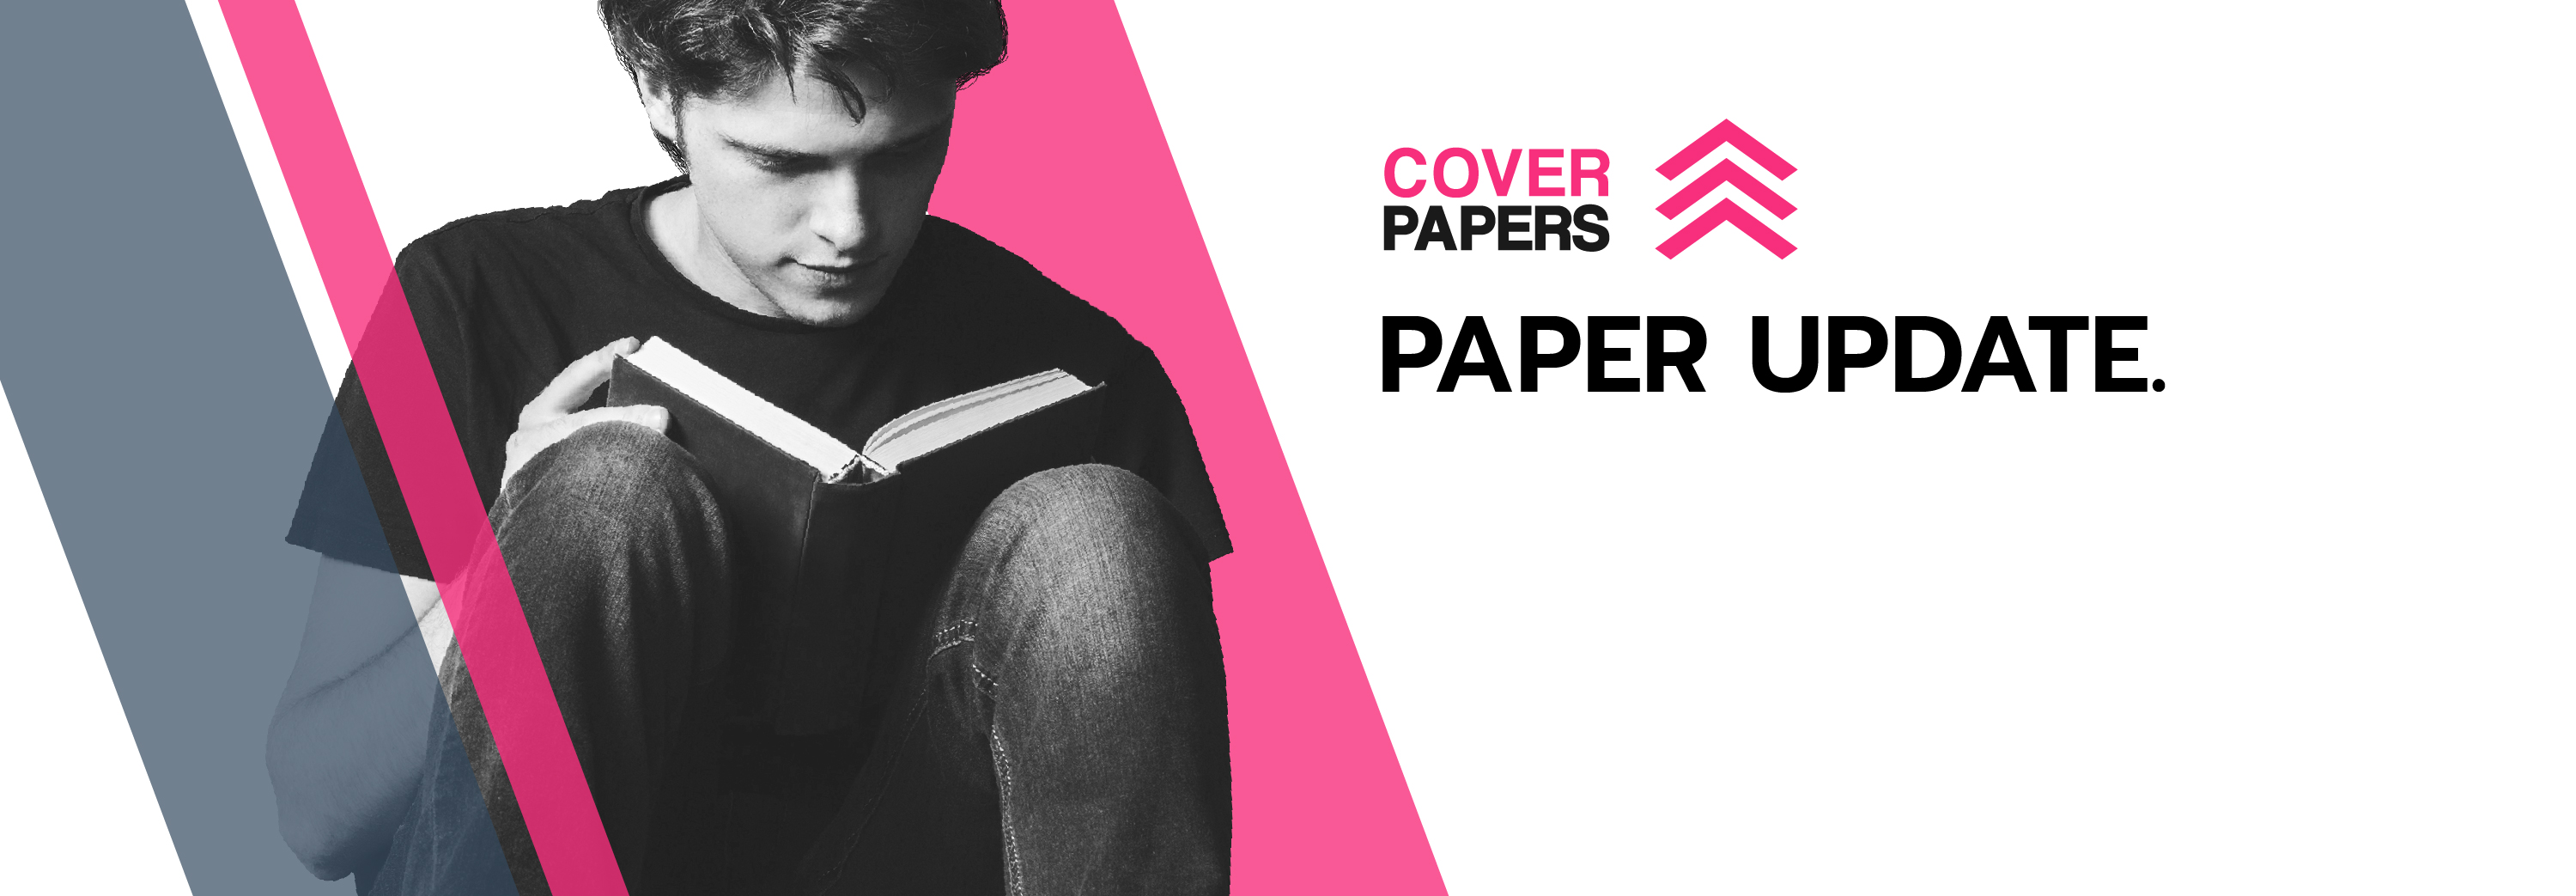 CoverPapers